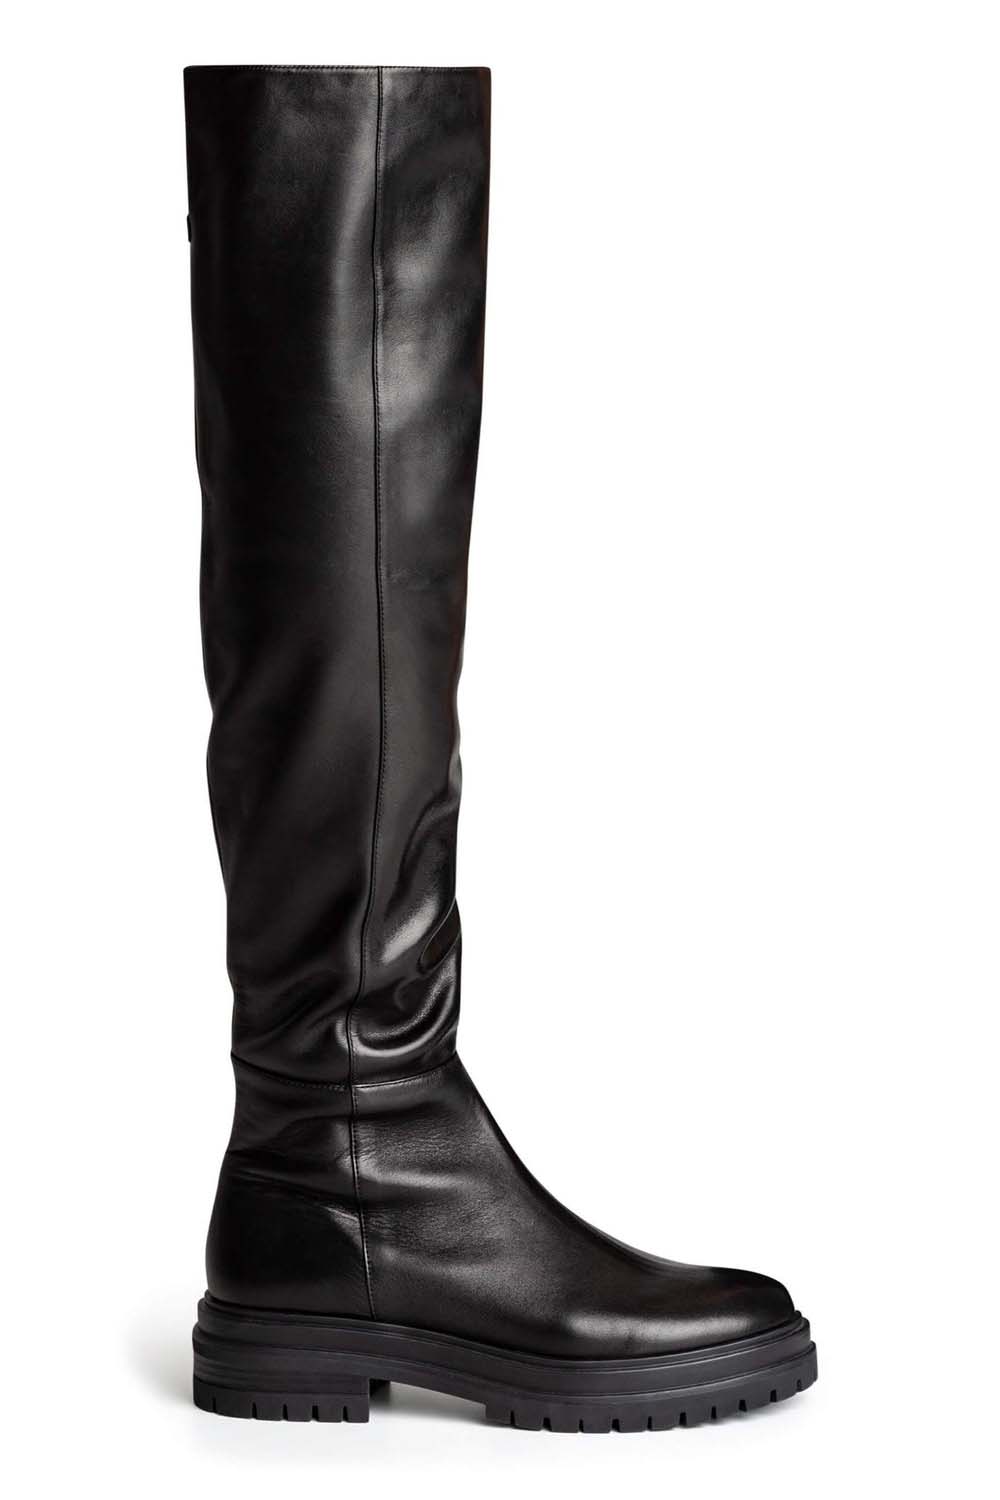 Black Tony Bianco Windy 4.5cm Women's Over The Knee Boots | 1763-EJLTF